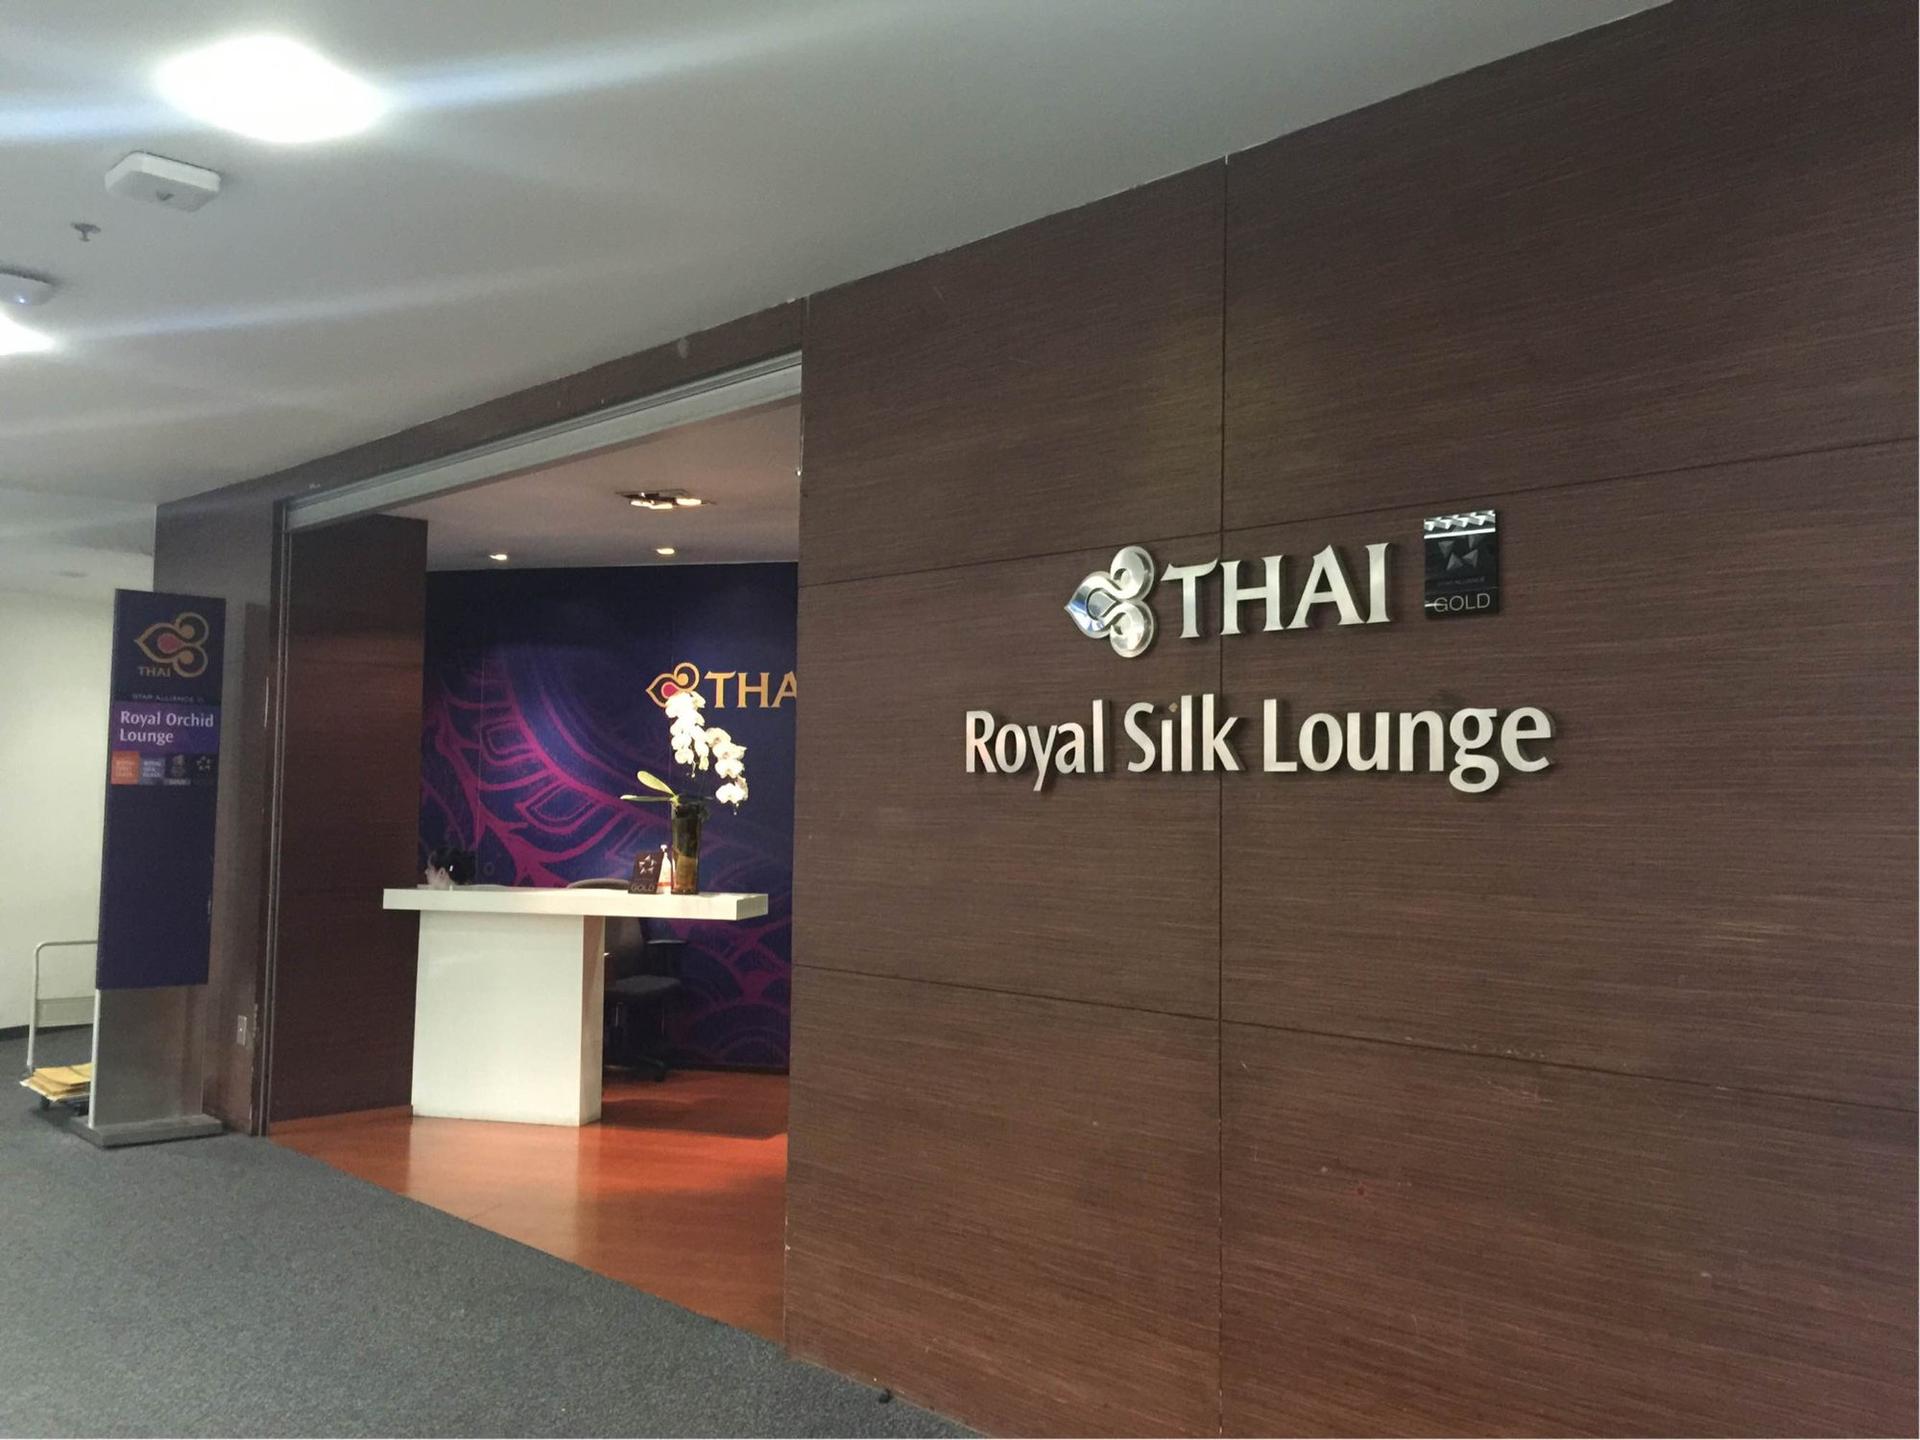 Thai Airways Royal Orchid Lounge image 15 of 22